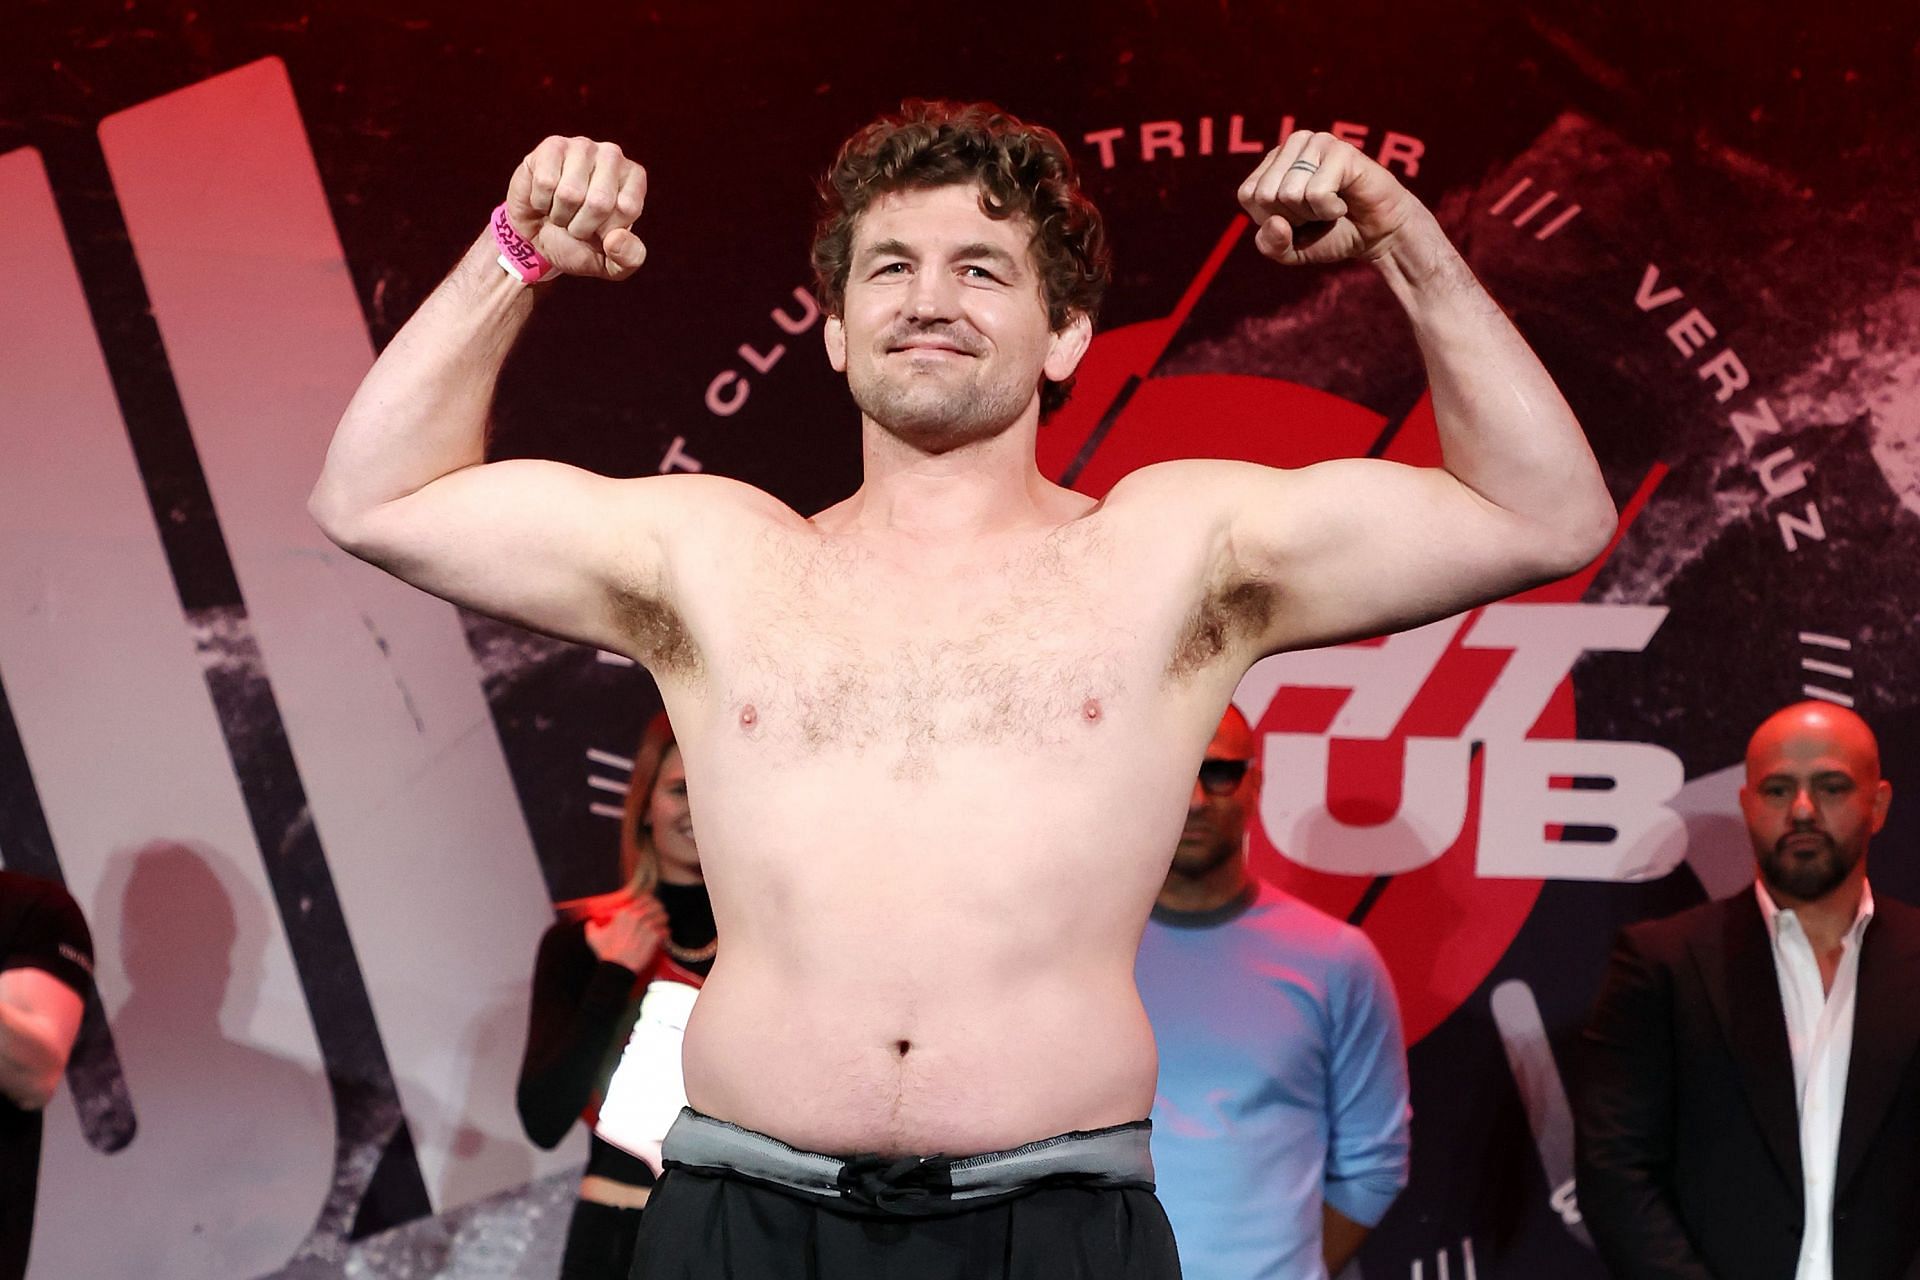 Former UFC star Ben Askren appeared to be in alarming shape for his recent fight with Jake Paul